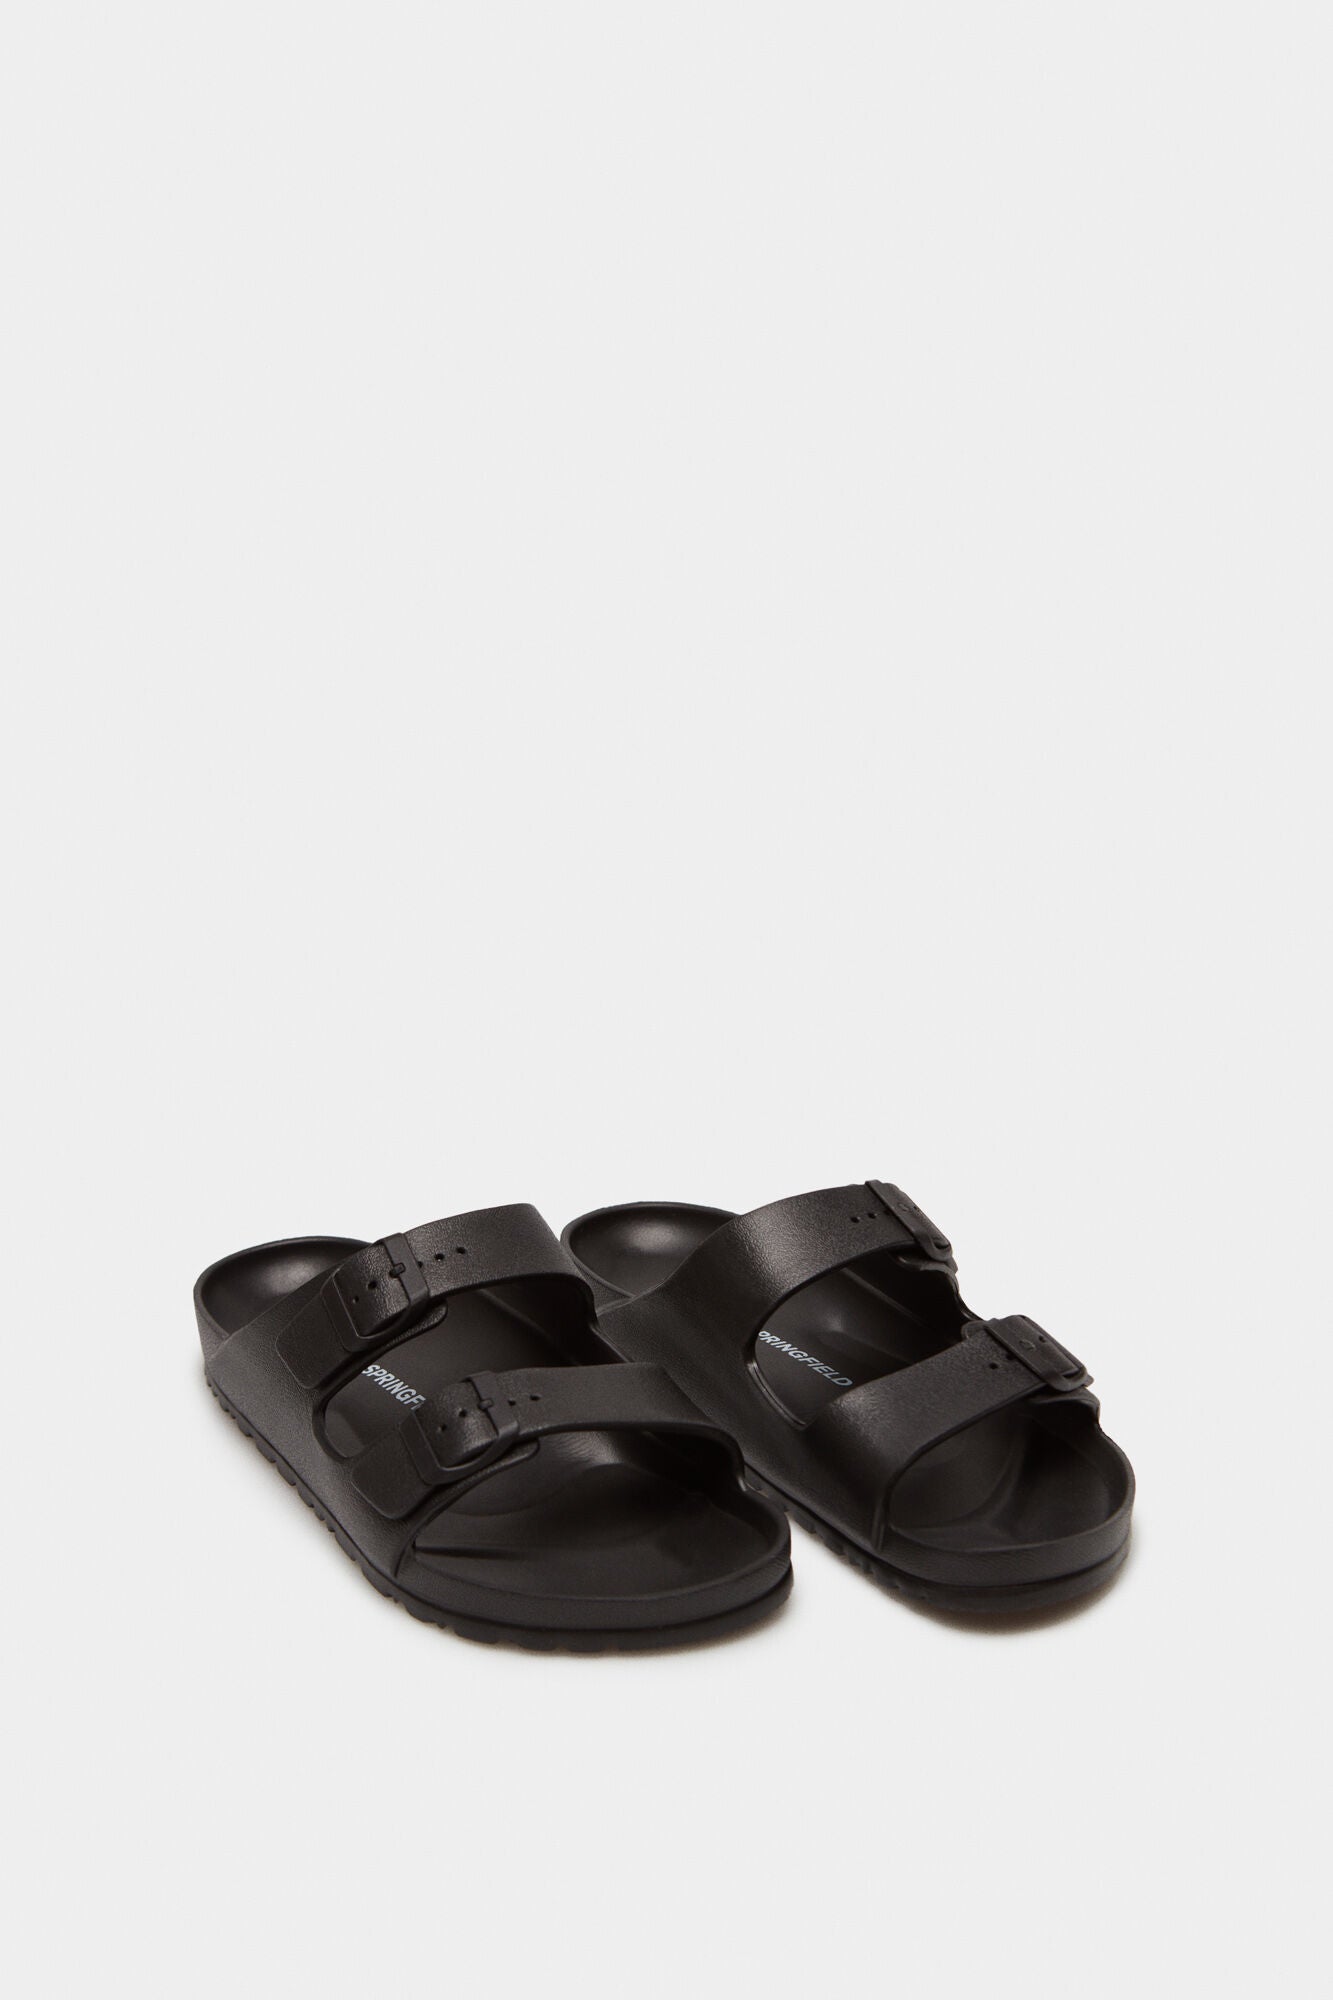 Black 2 Strap Light Weight Slippers